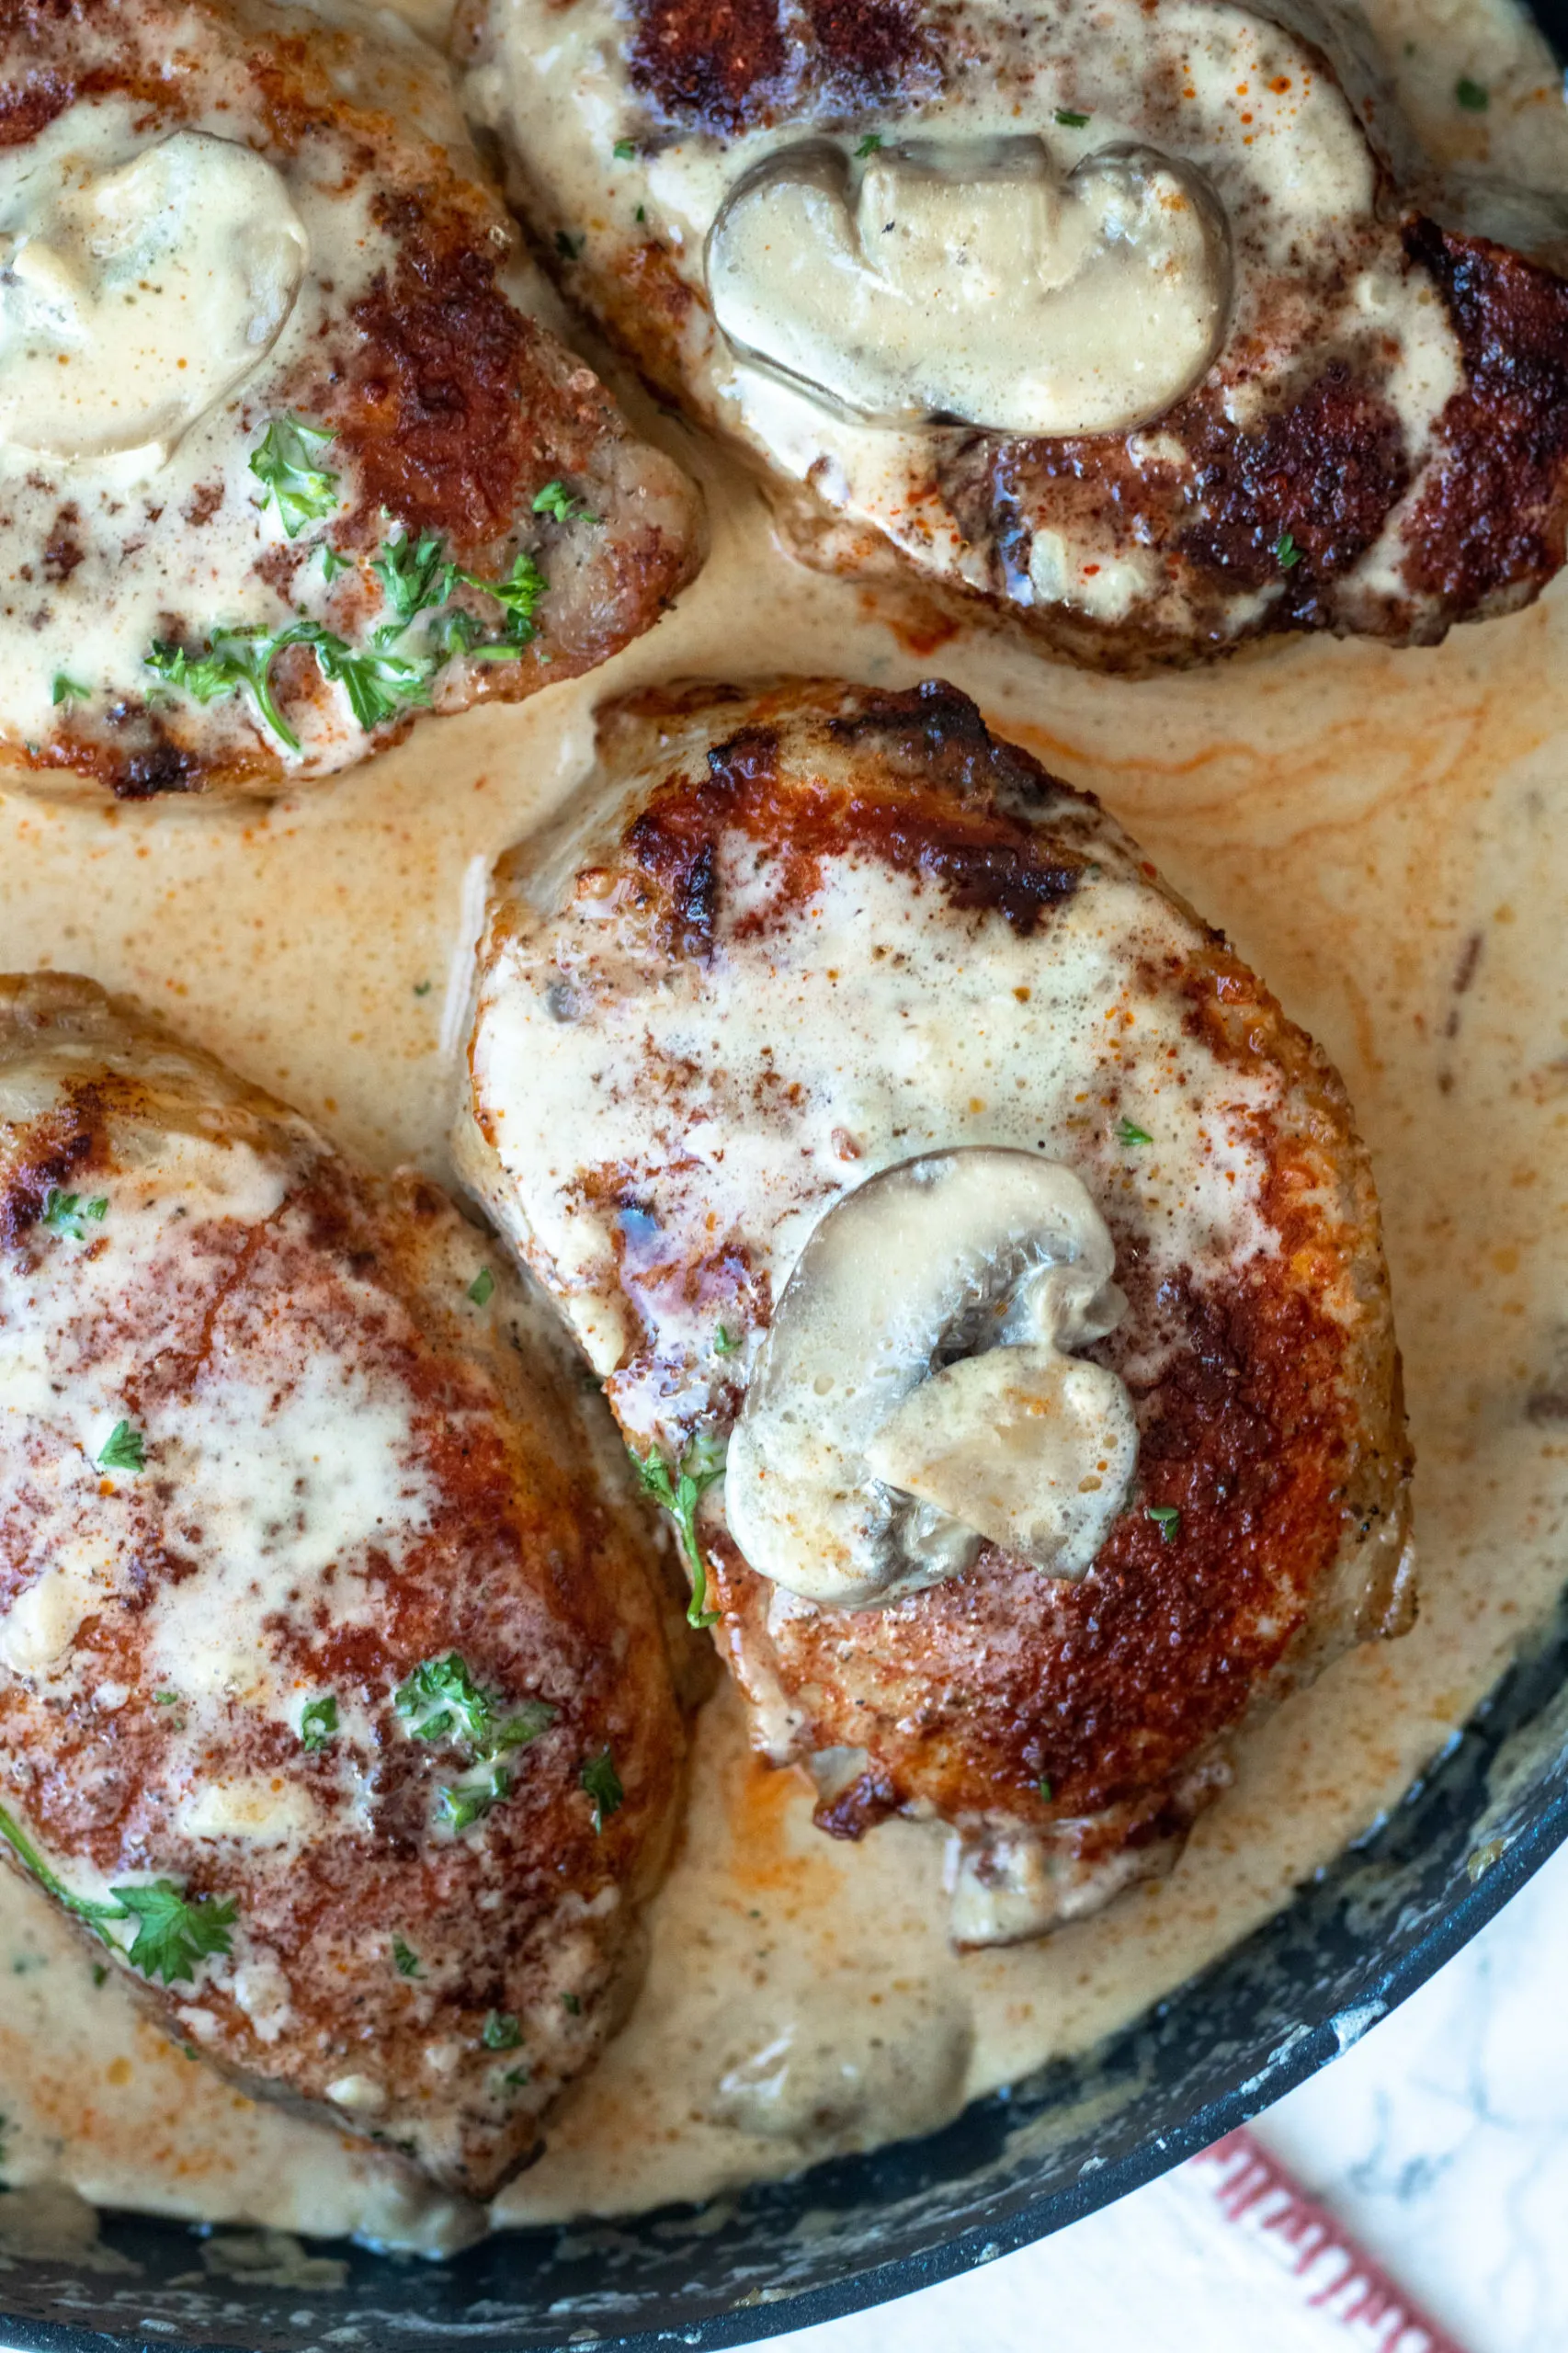 Thick cut boneless pork chops are seasoned and baked in the oven before getting smothered in a bacon and mushroom cream sauce. This easy keto smothered pork chops recipe is a crowd pleaser for all. 